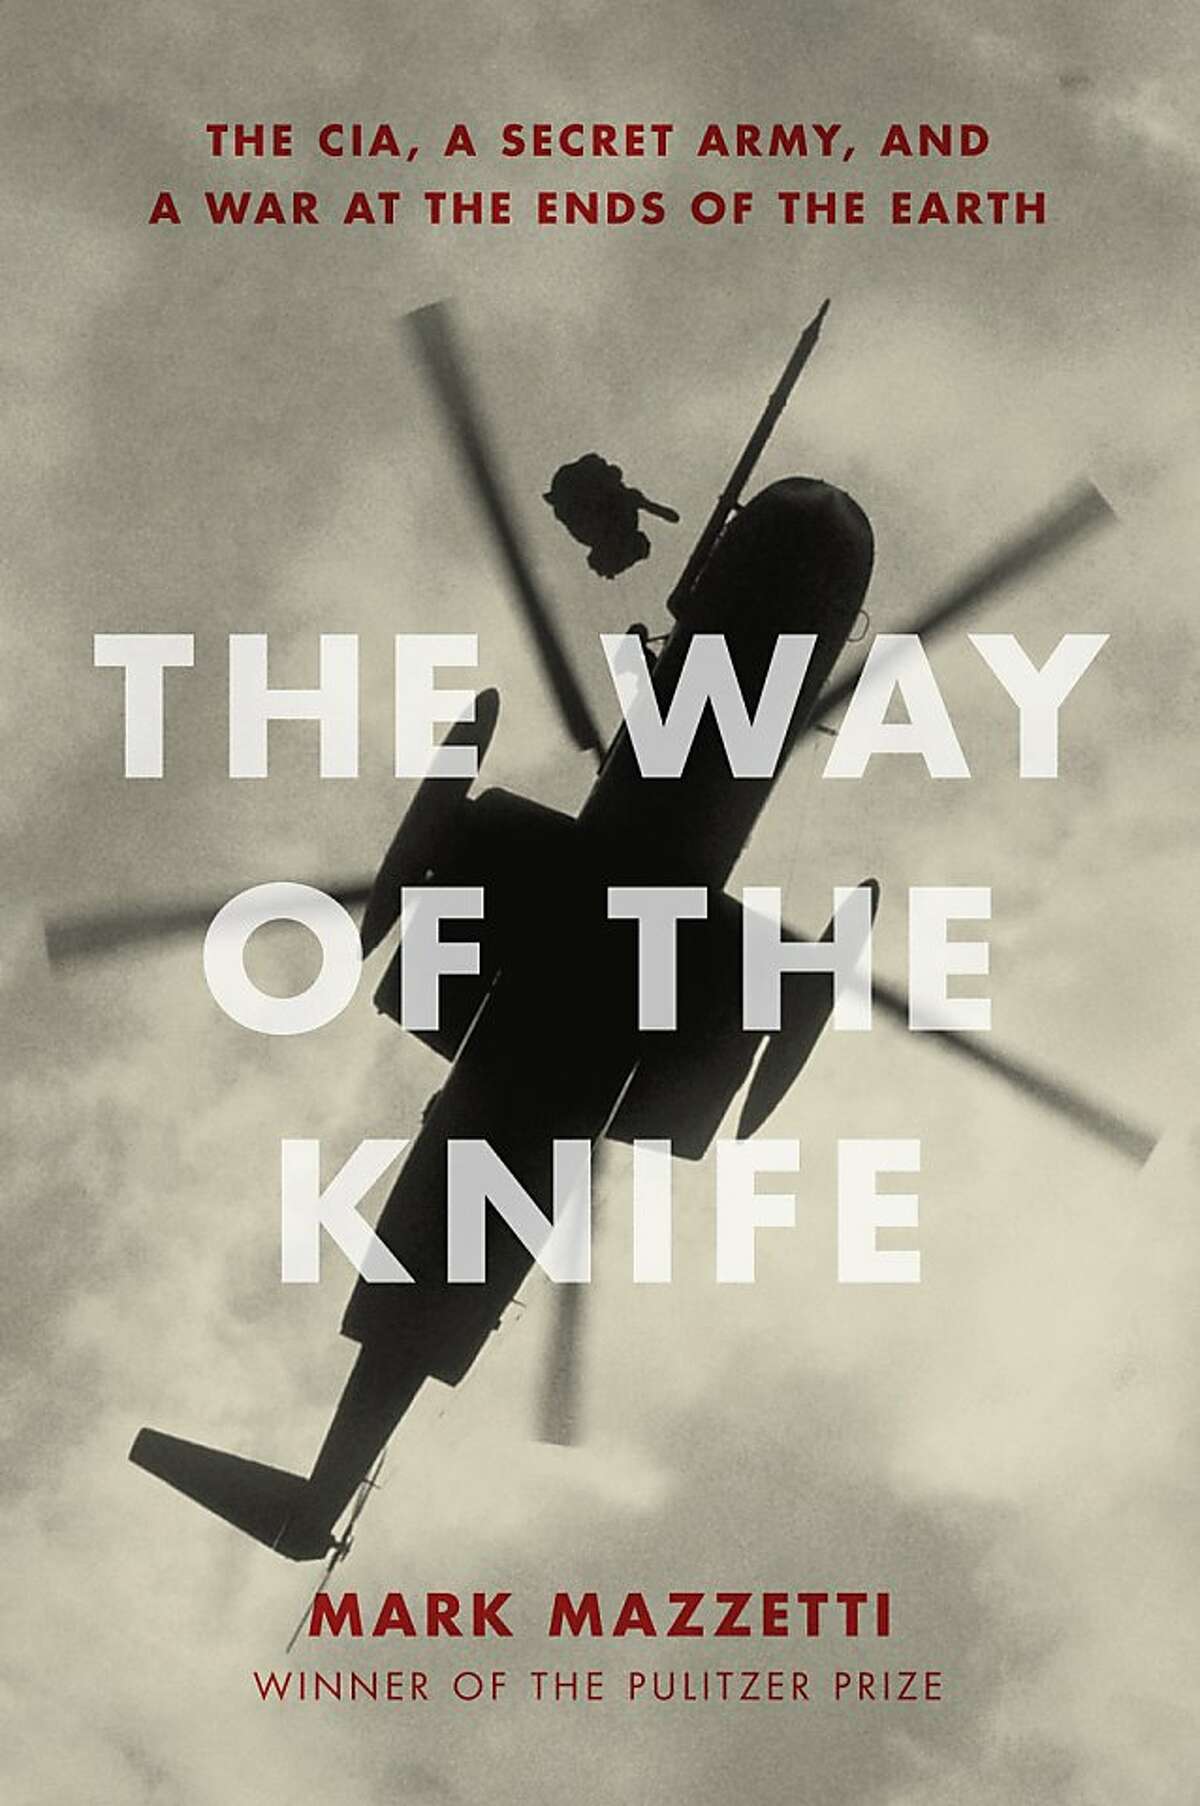 The Way of the Knife, by Mark Mazetti